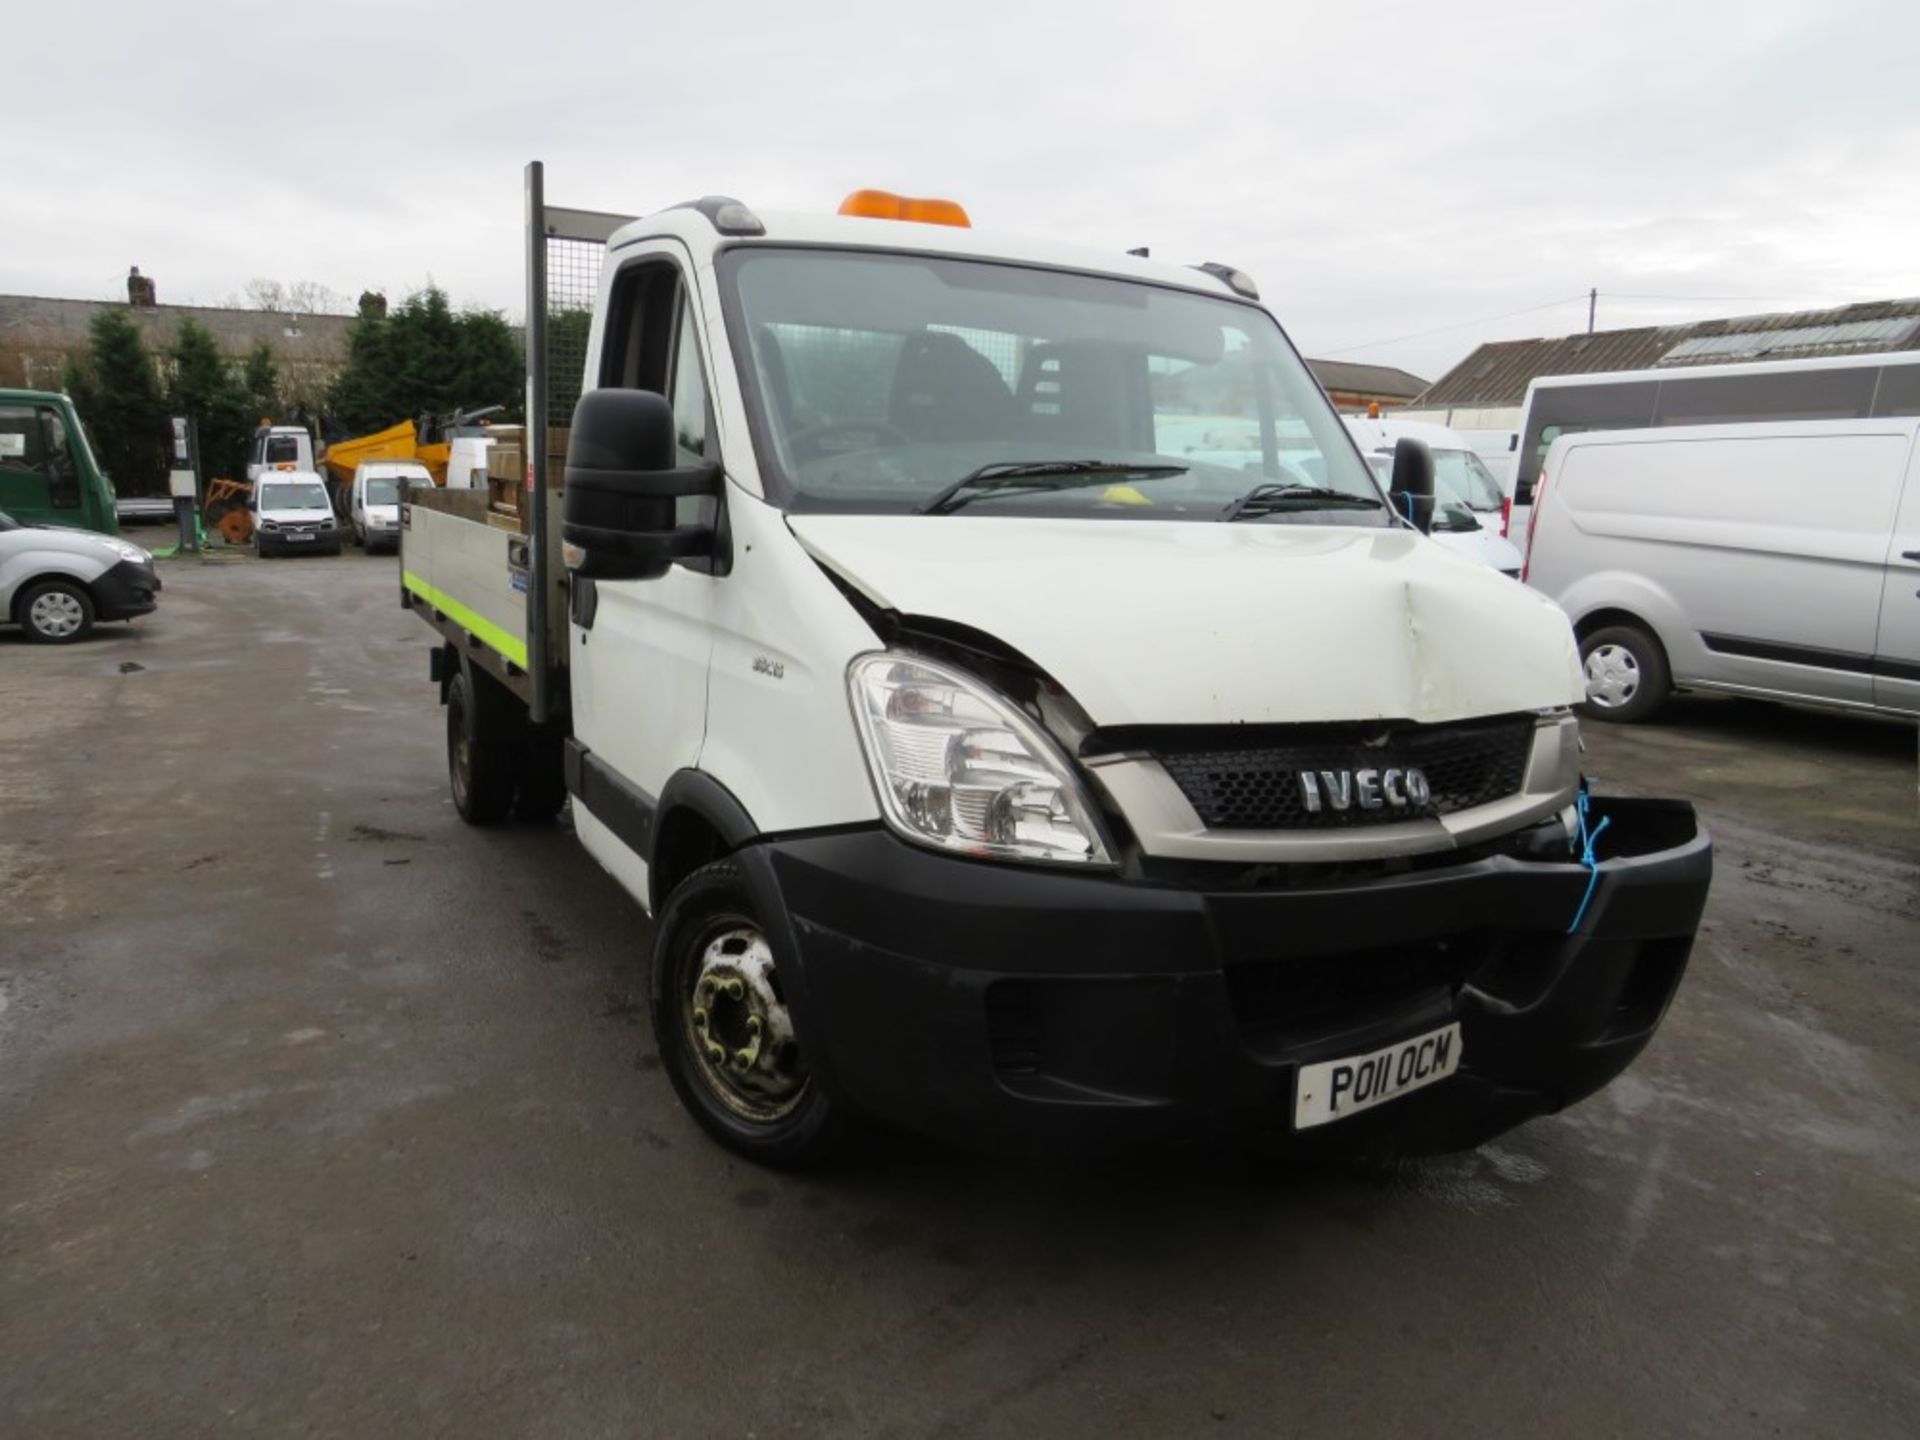 11 reg IVECO DAILY 35C15 MWB TIPPER (DIRECT COUNCIL) 1ST REG 08/11, TEST 08/20, 98123M, V5 HERE, 1